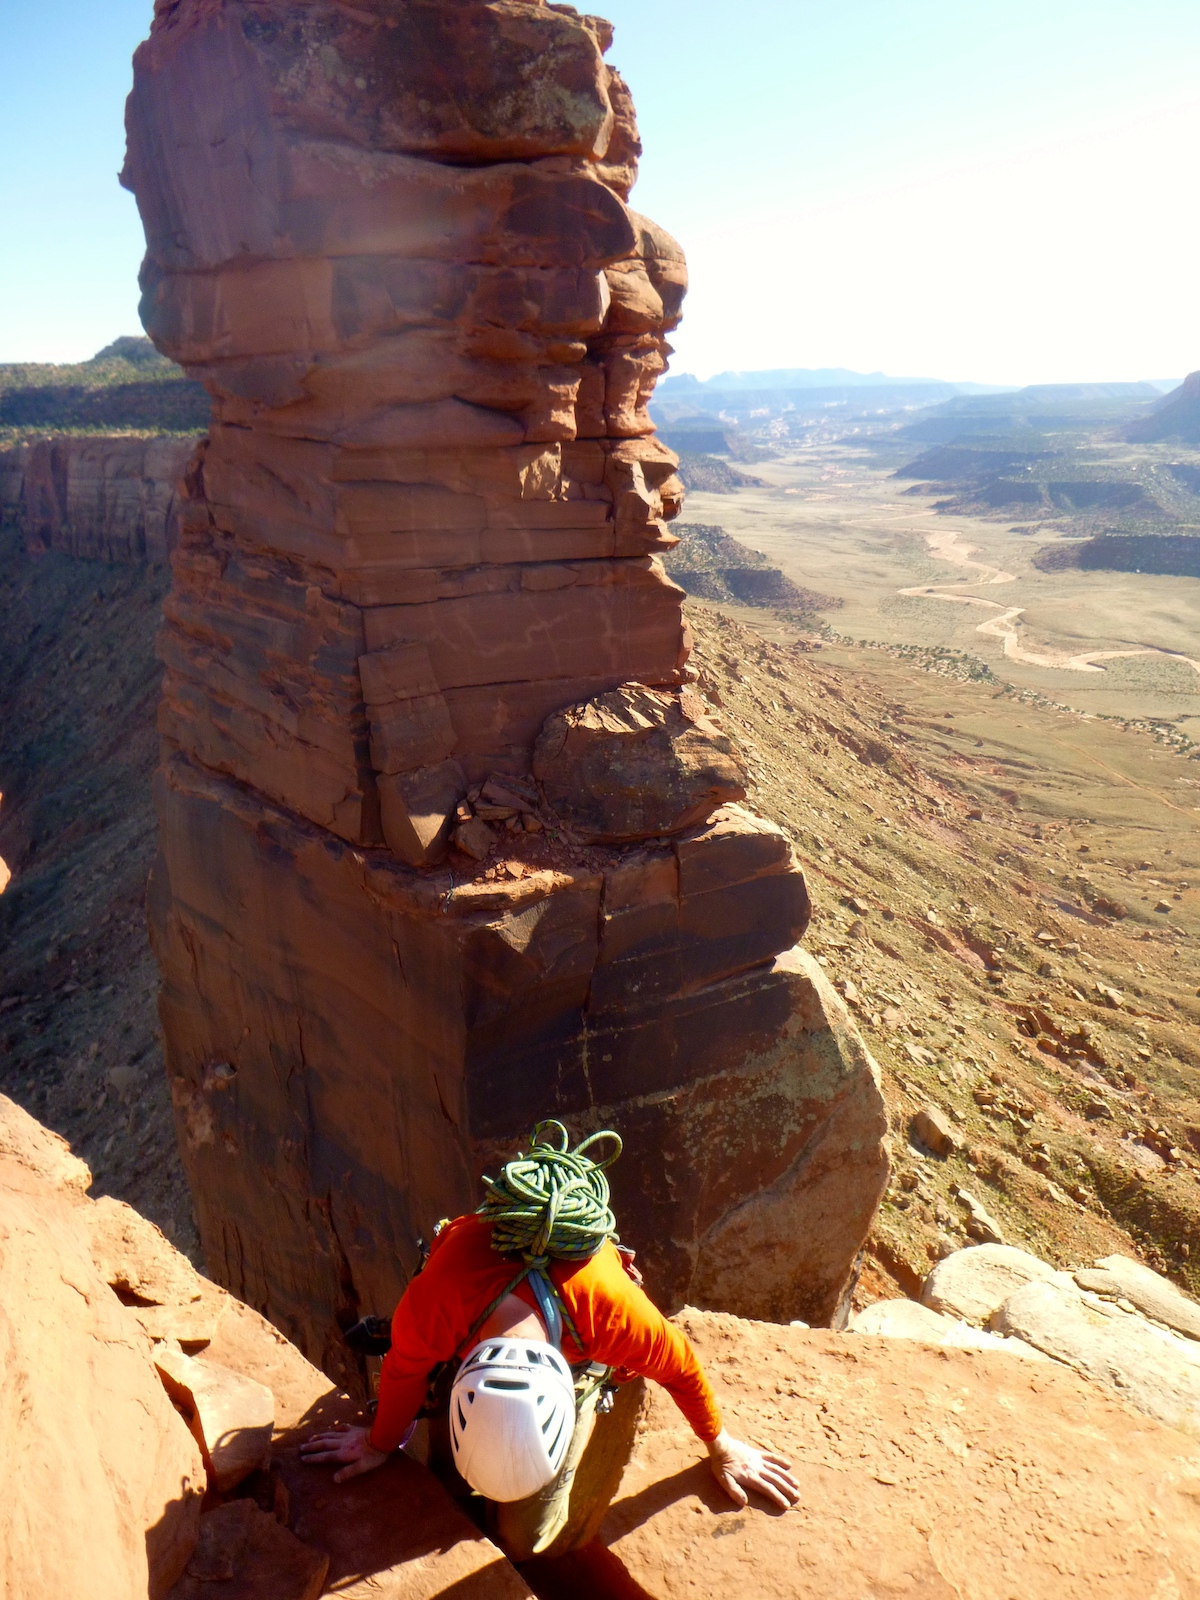 Ryan Franz down climbs from the summit of Bridger Jack Butte to access a rappel station in April 2015. The King of Pain pinnacle is in the background. The area is part of the Bears Ears National Monument designated by outgoing President Barack Obama on December 28, 2016. [Photo] Derek Franz